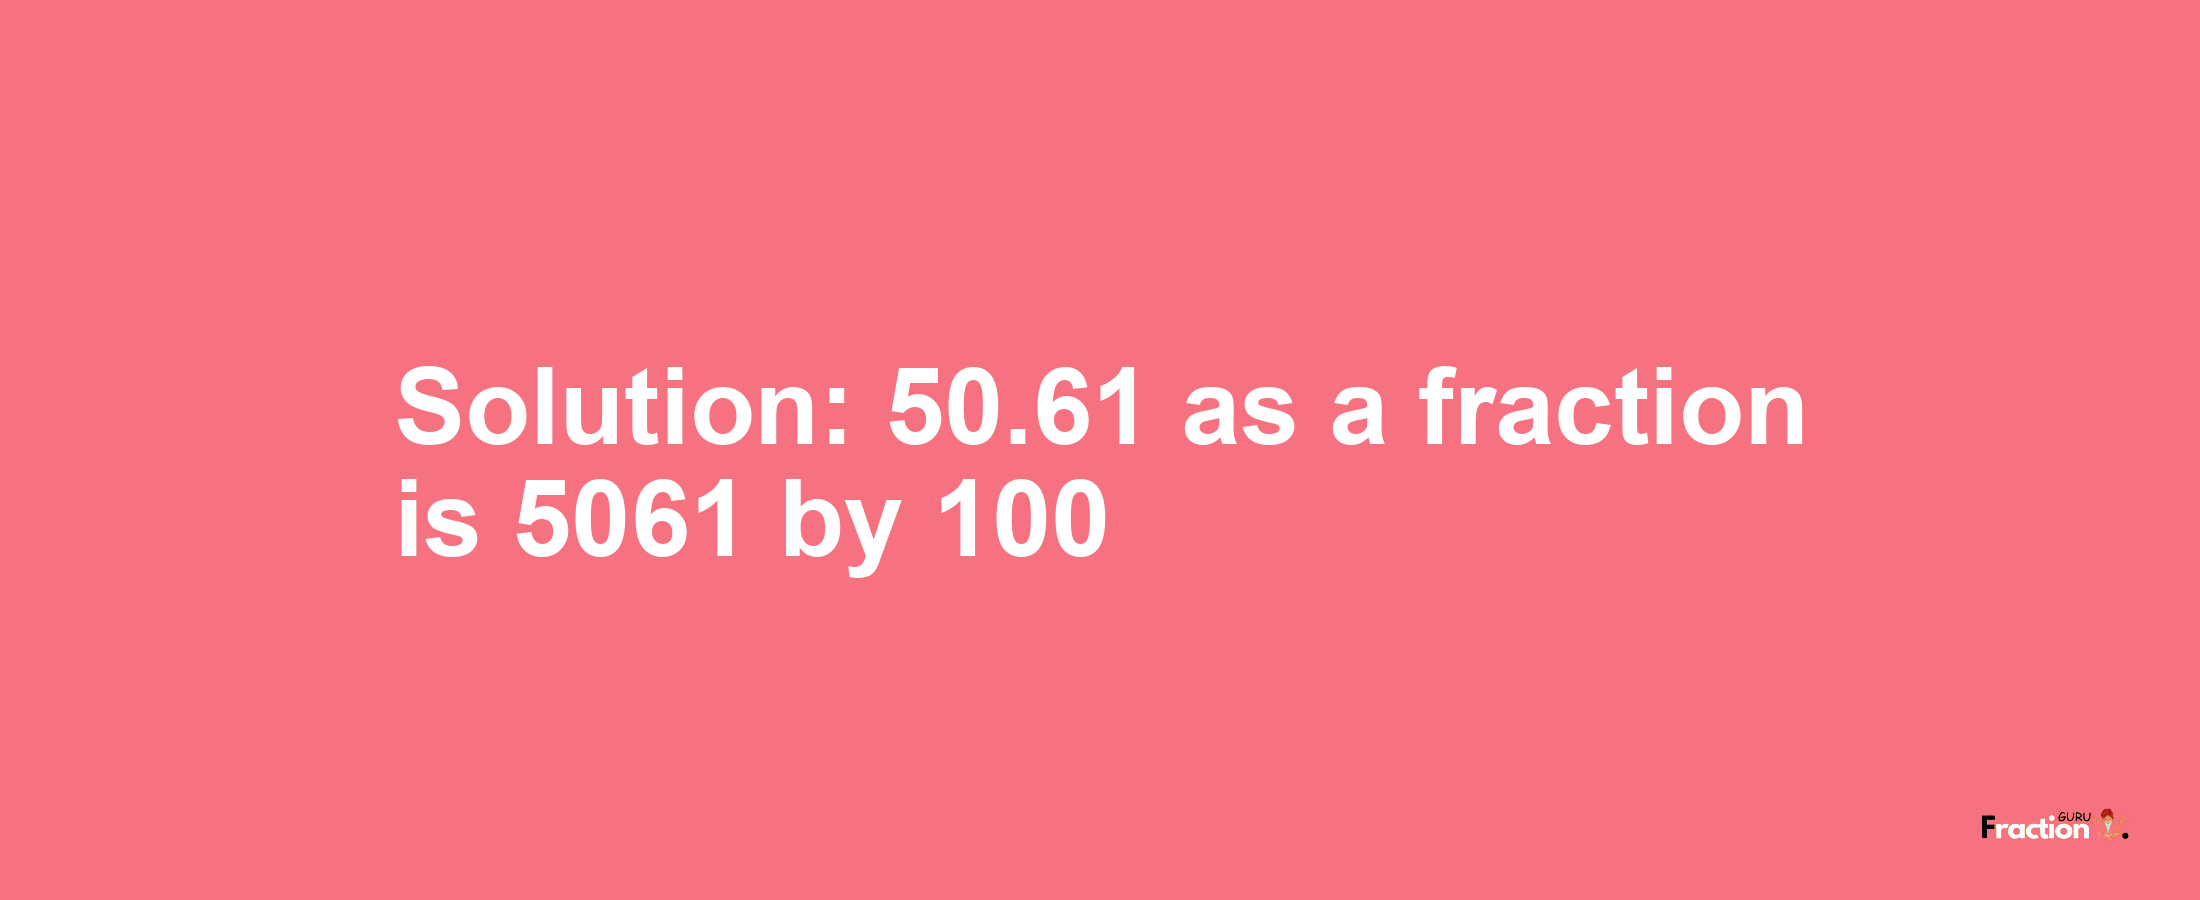 Solution:50.61 as a fraction is 5061/100